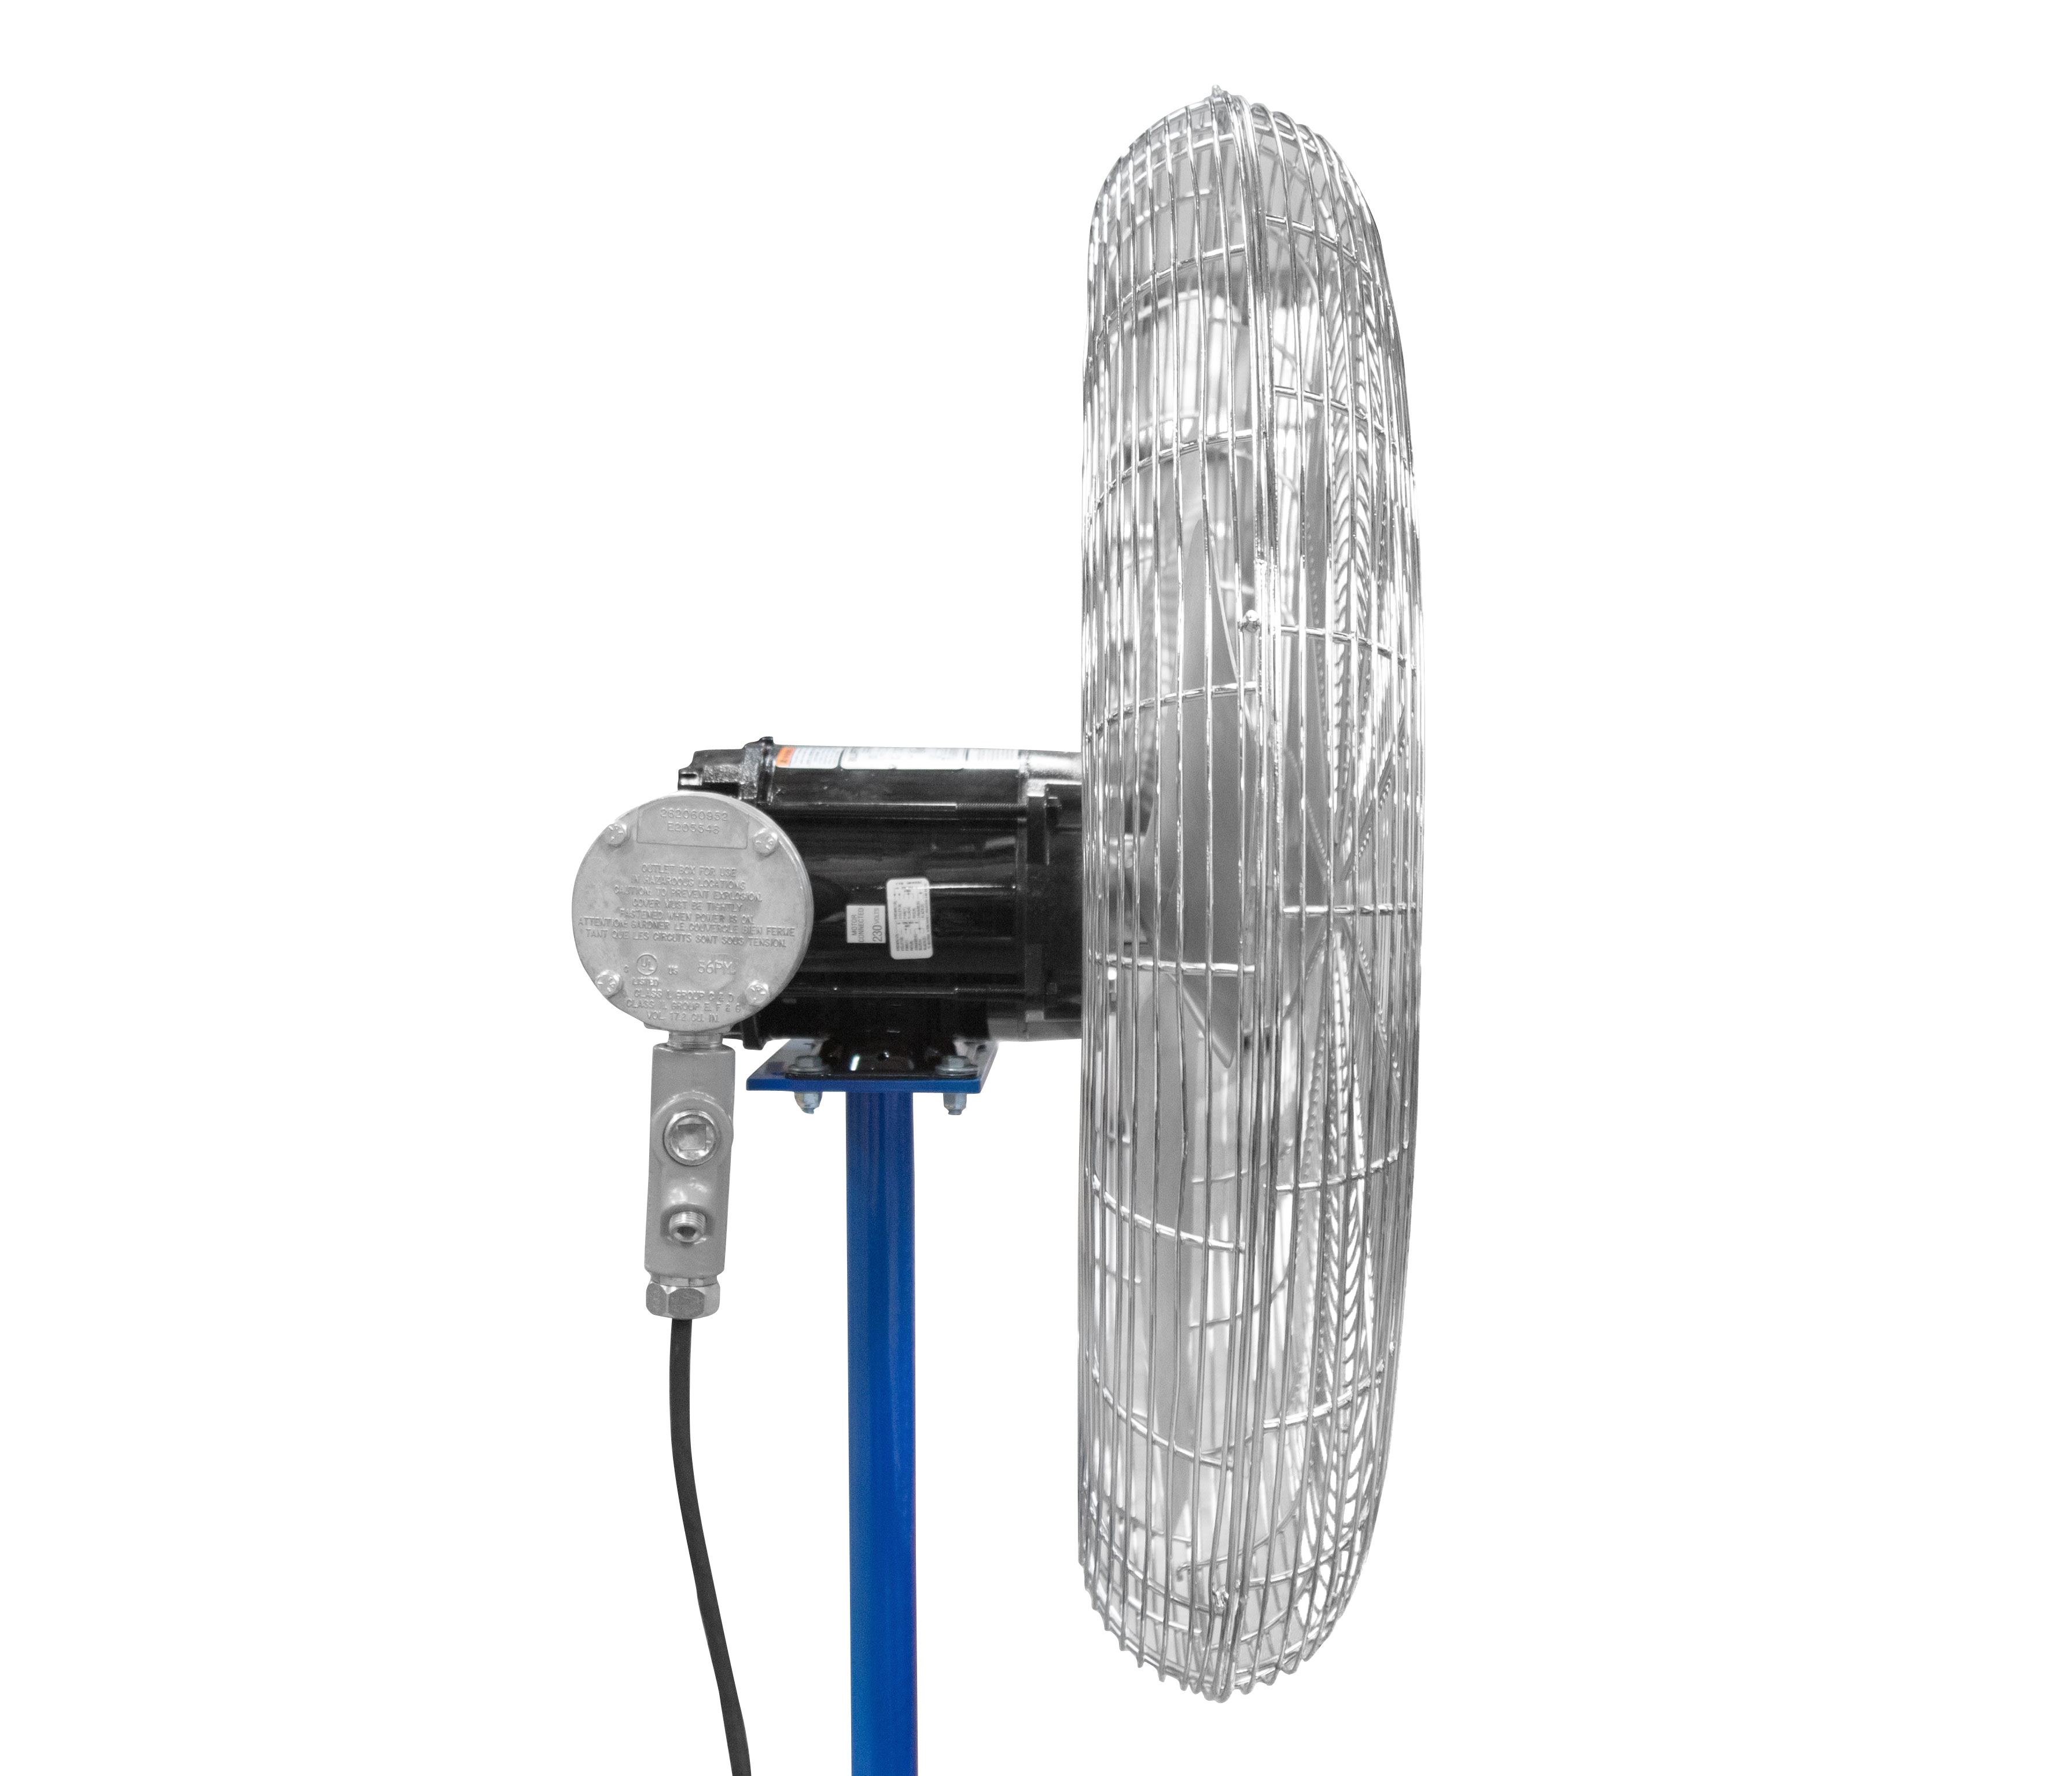 Class 1 Division 1 Explosion Proof Fan with 100' Cord